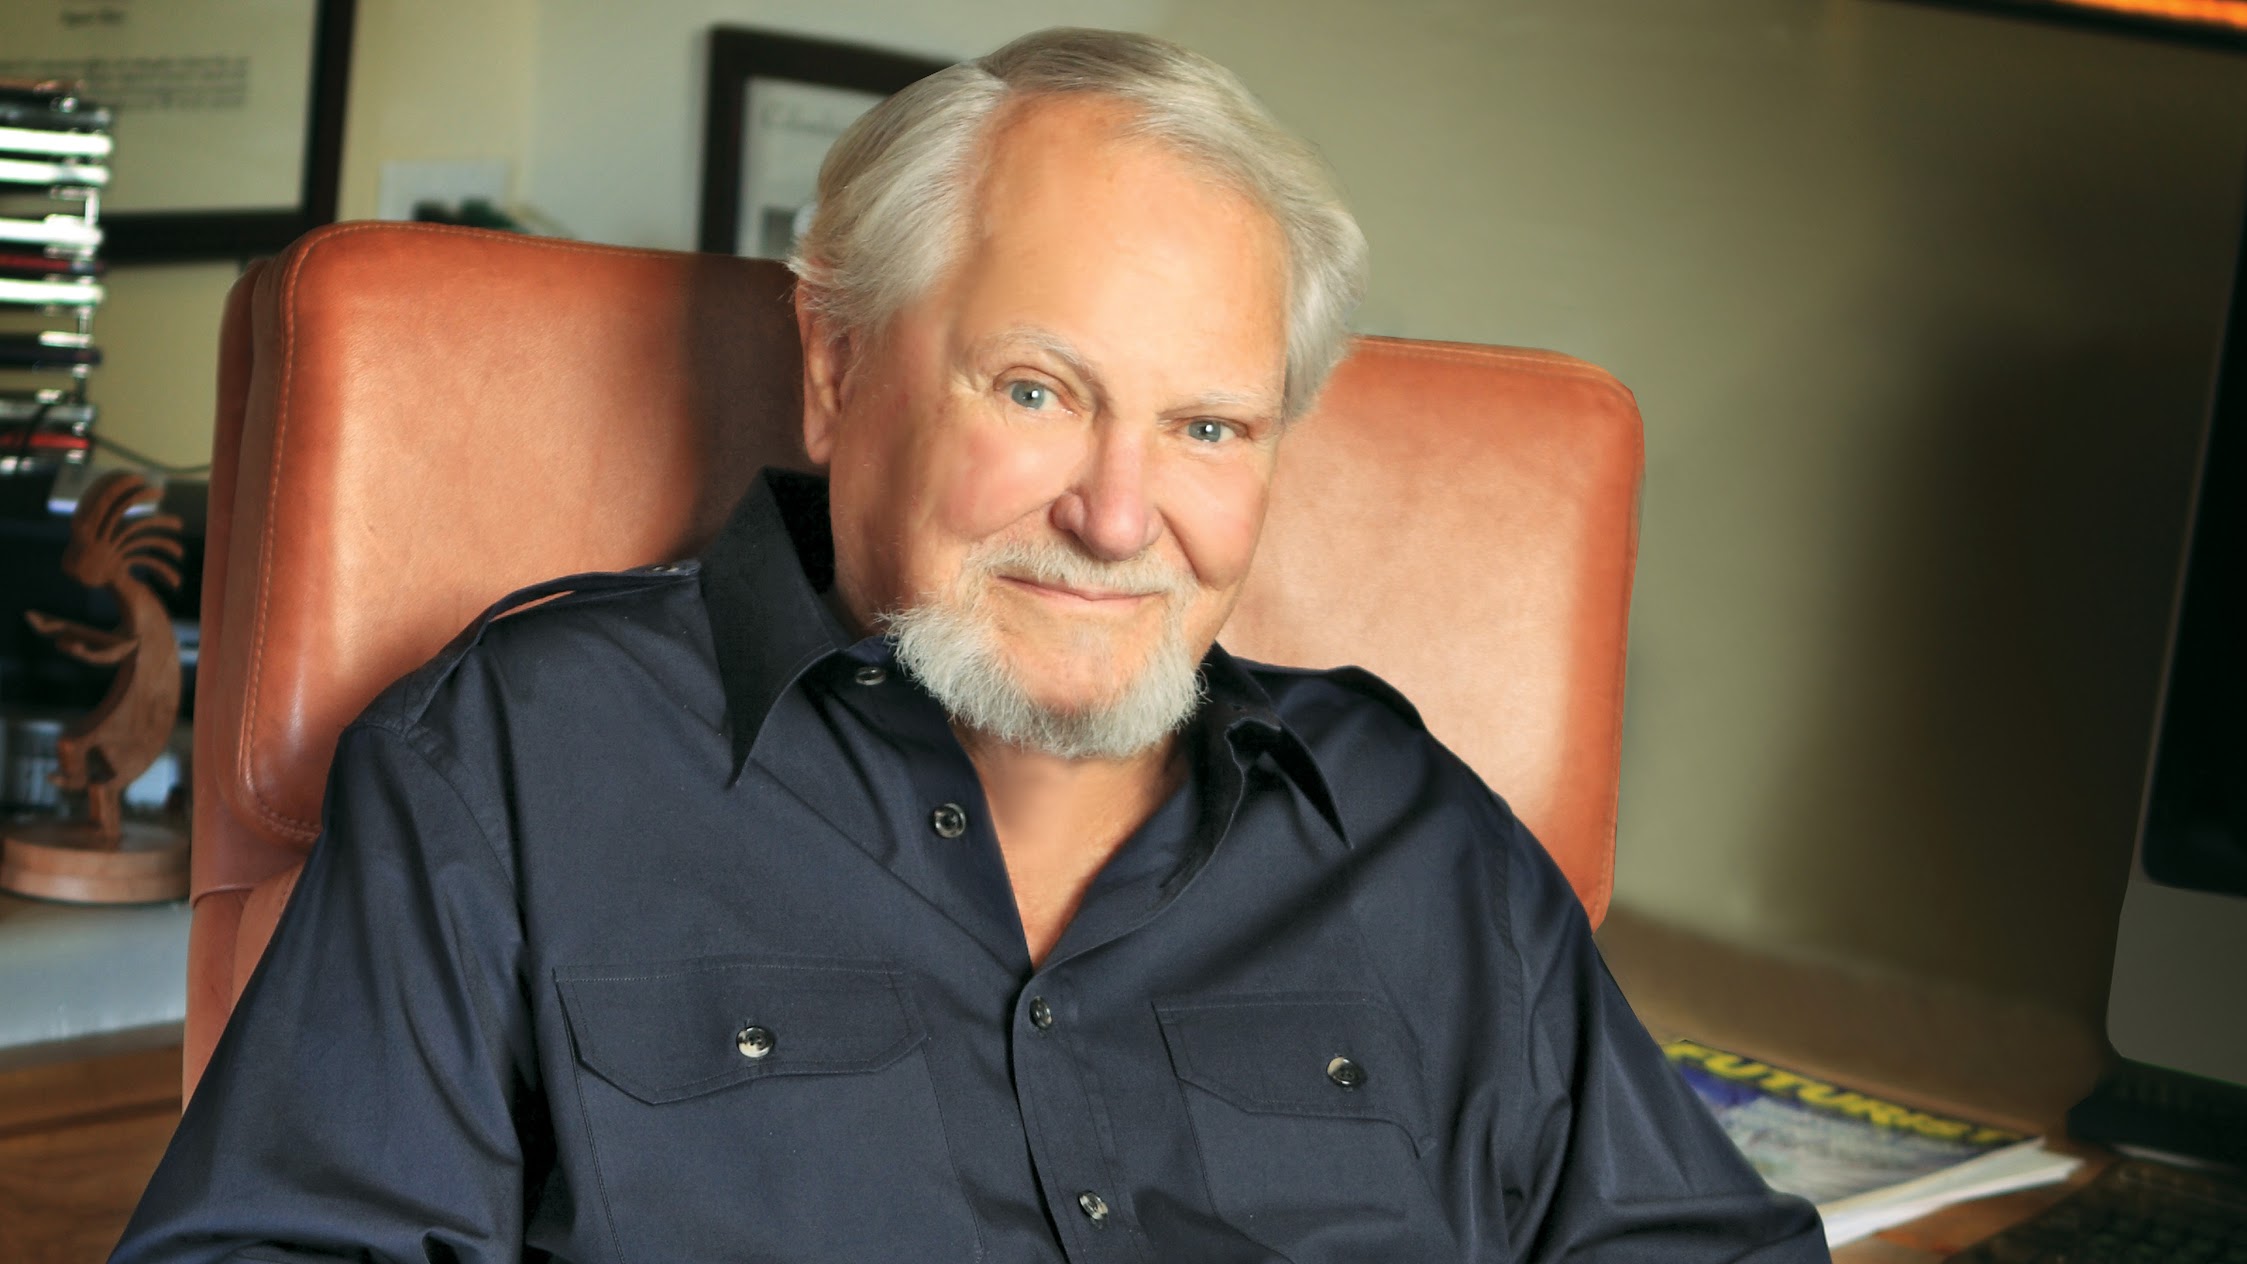 Clive Cussler wiki, bio, age, net worth, movies, best books, married, wife